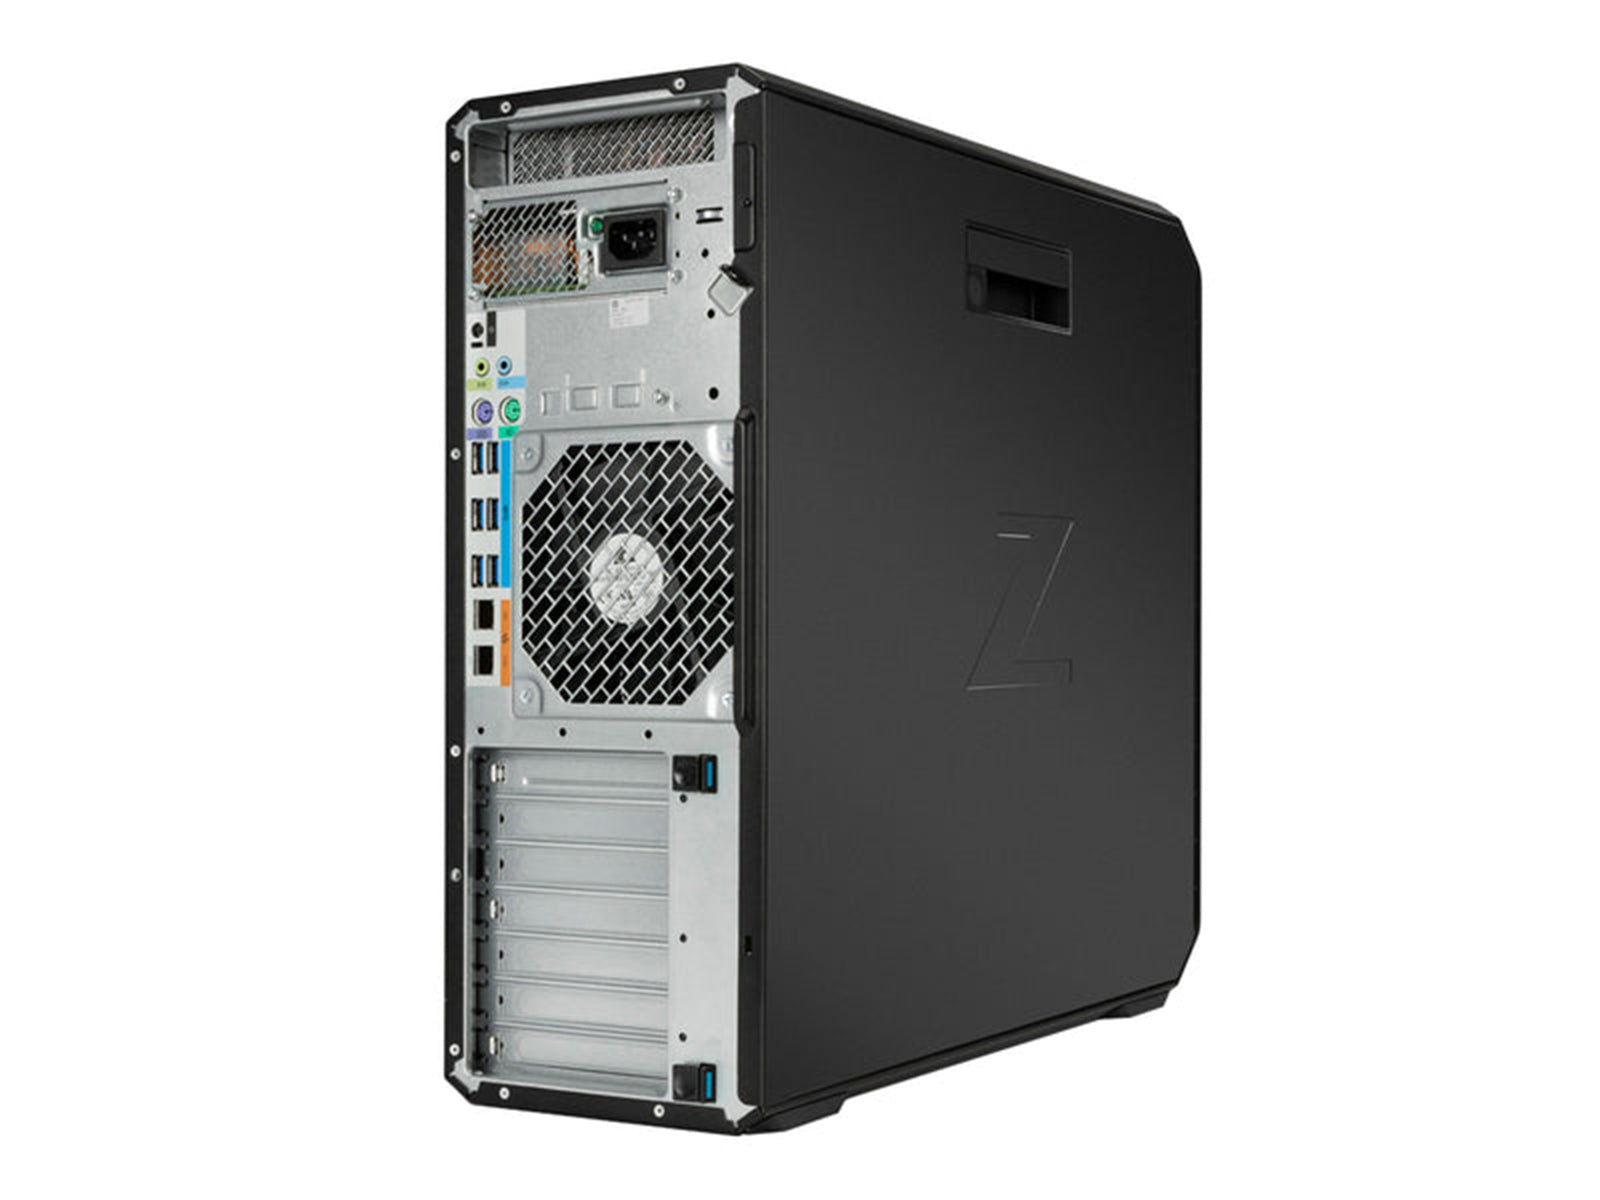 HP Z6 G4 | Intel Xeon Argent 4215R | 64 Go DDR4 | SSD NVMe 512 Go + 1 To | Quadro P2200 | Win10 Pro